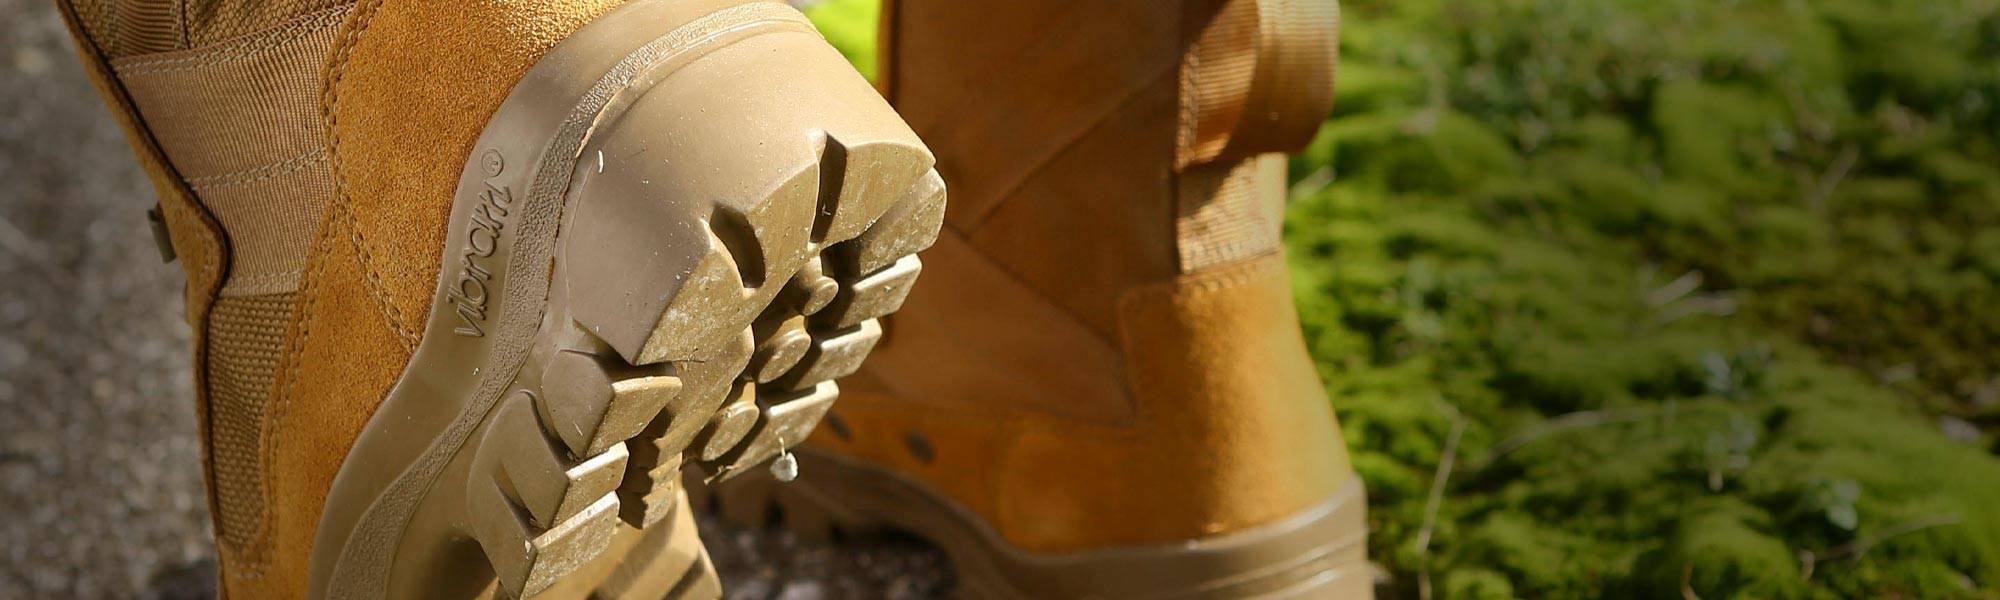 GARMONT MILITARY BOOTS